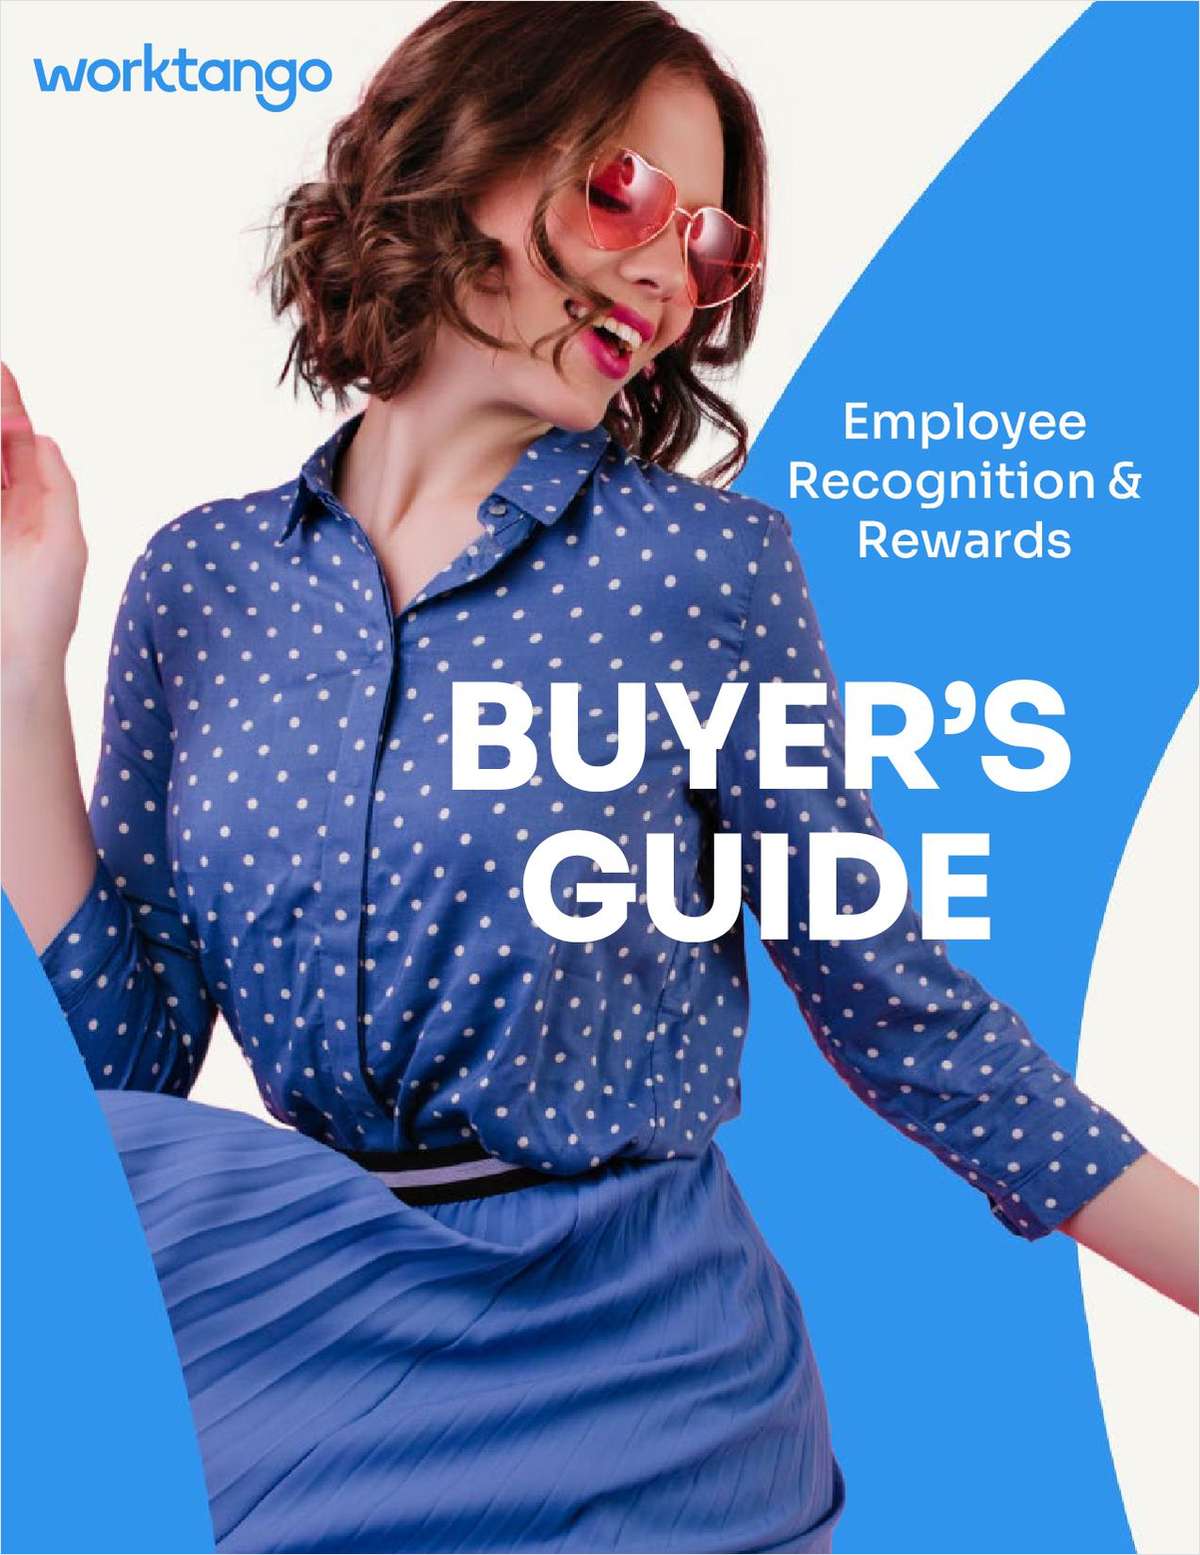 Delivering recognition and rewards for higher employee engagement